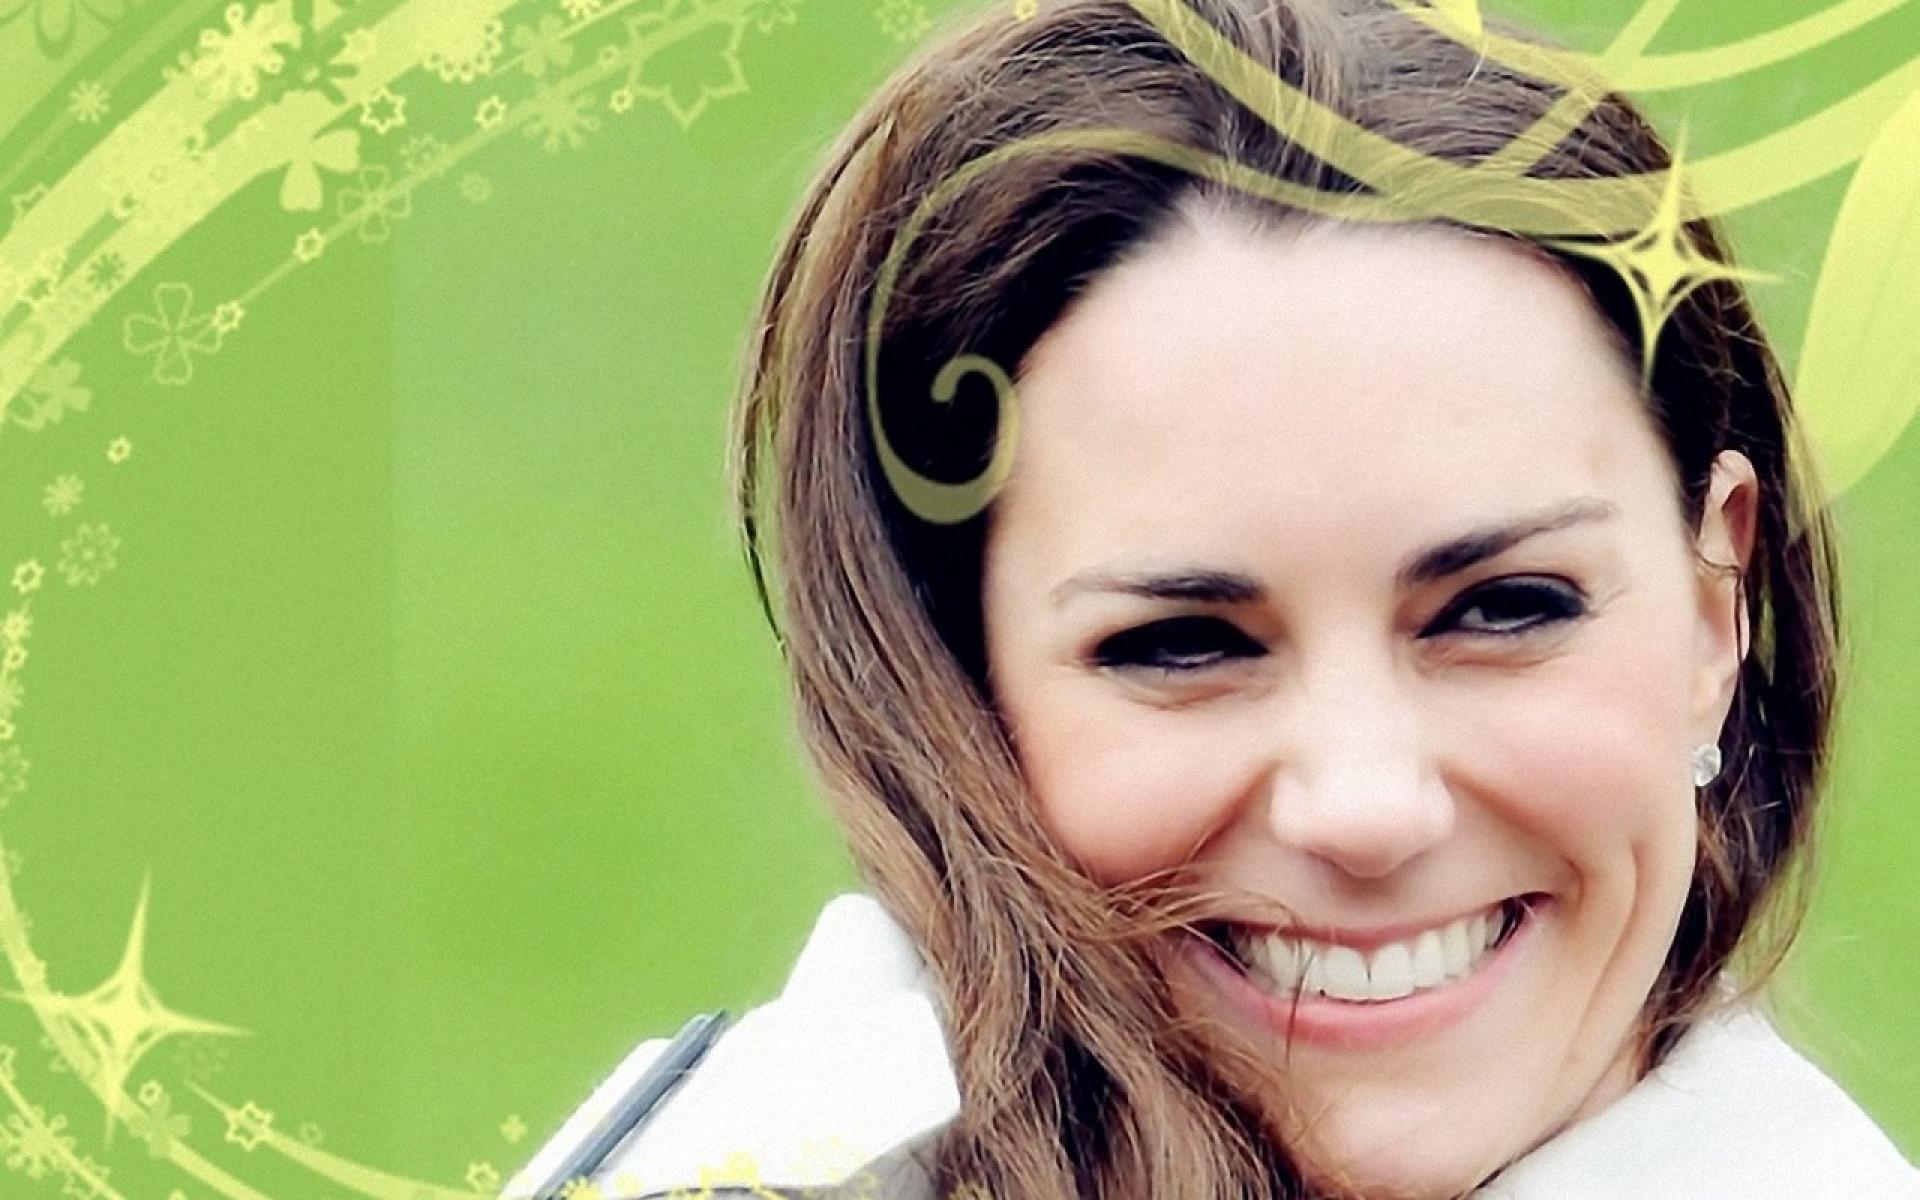 Kate Middleton Wallpapers - HD Wallpapers 90829